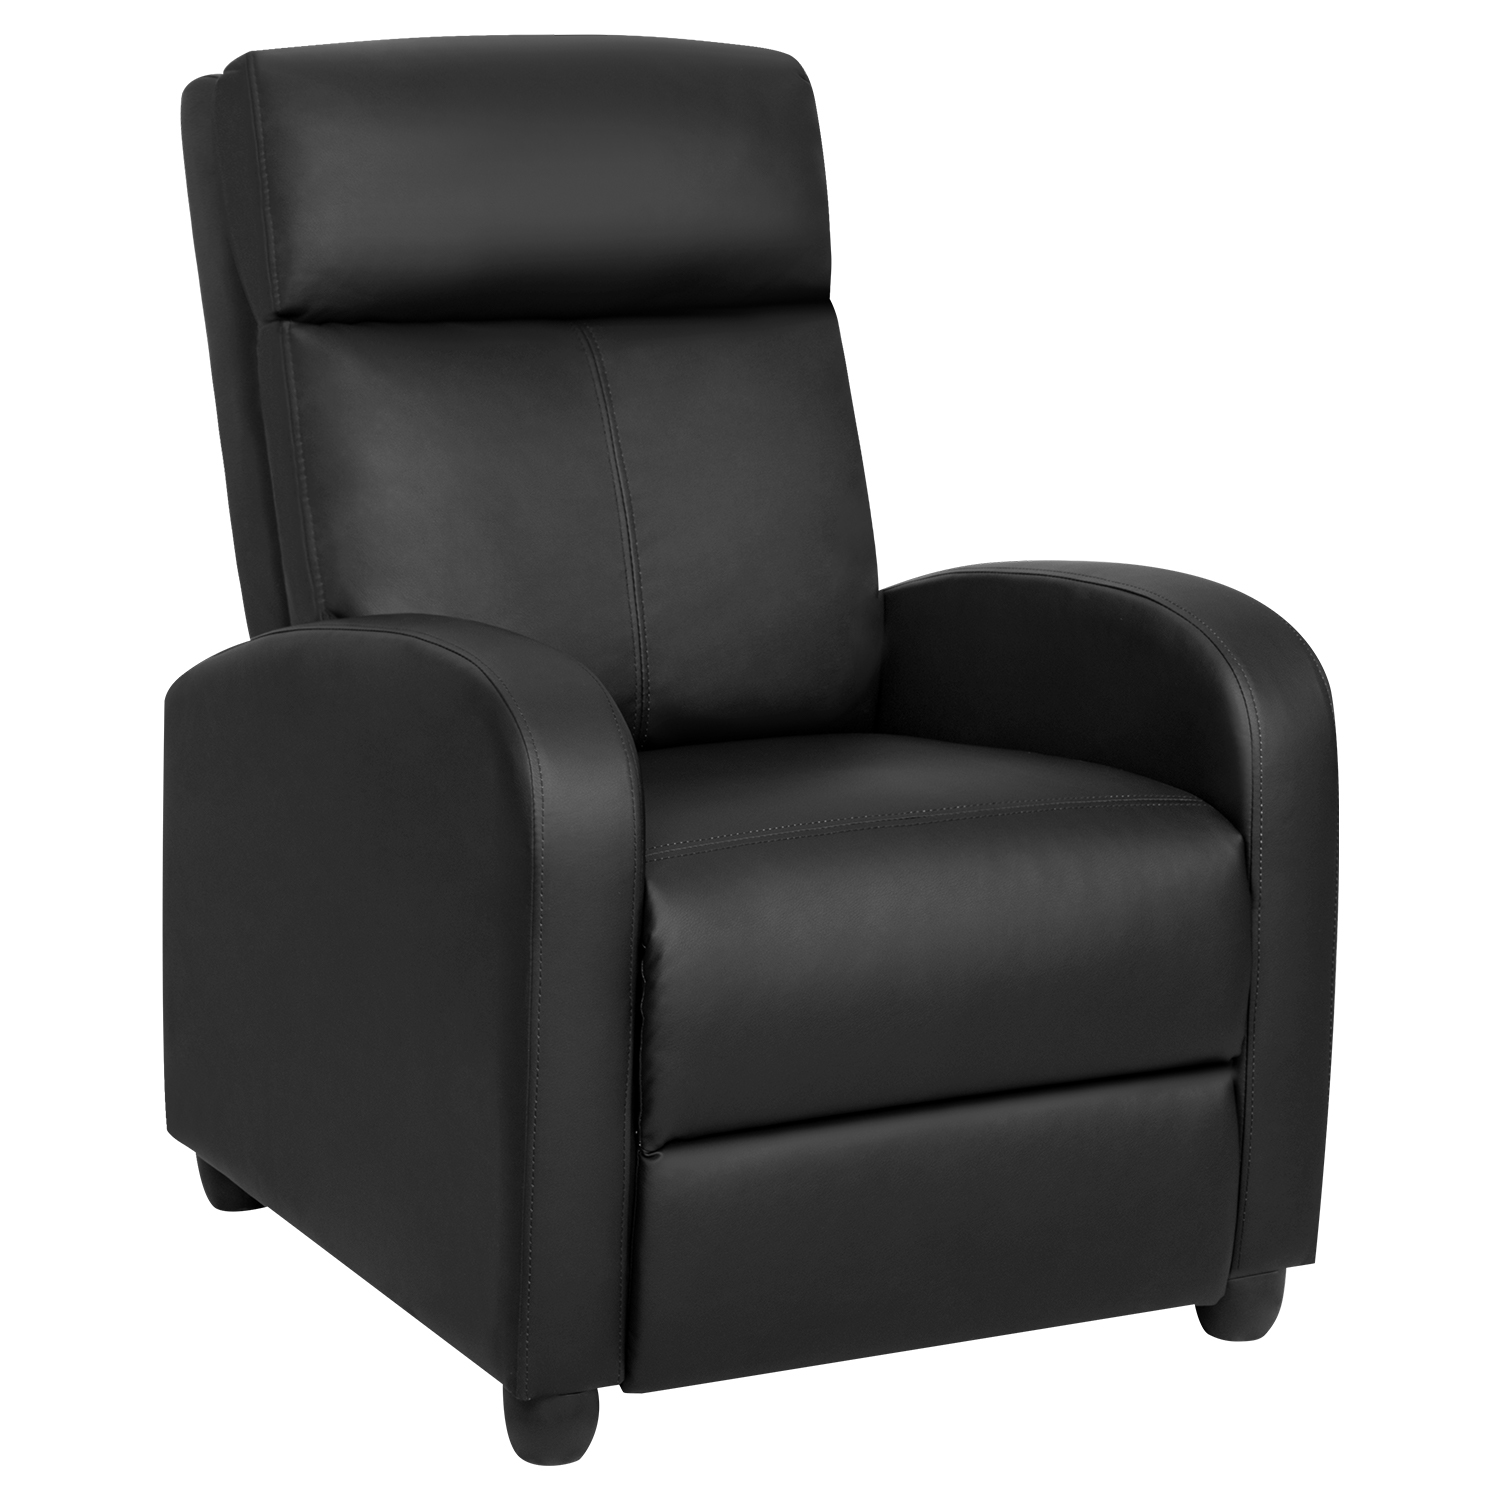 Lacoo Home Theater Recliner with Padded Seat and Backrest, Black - image 1 of 8